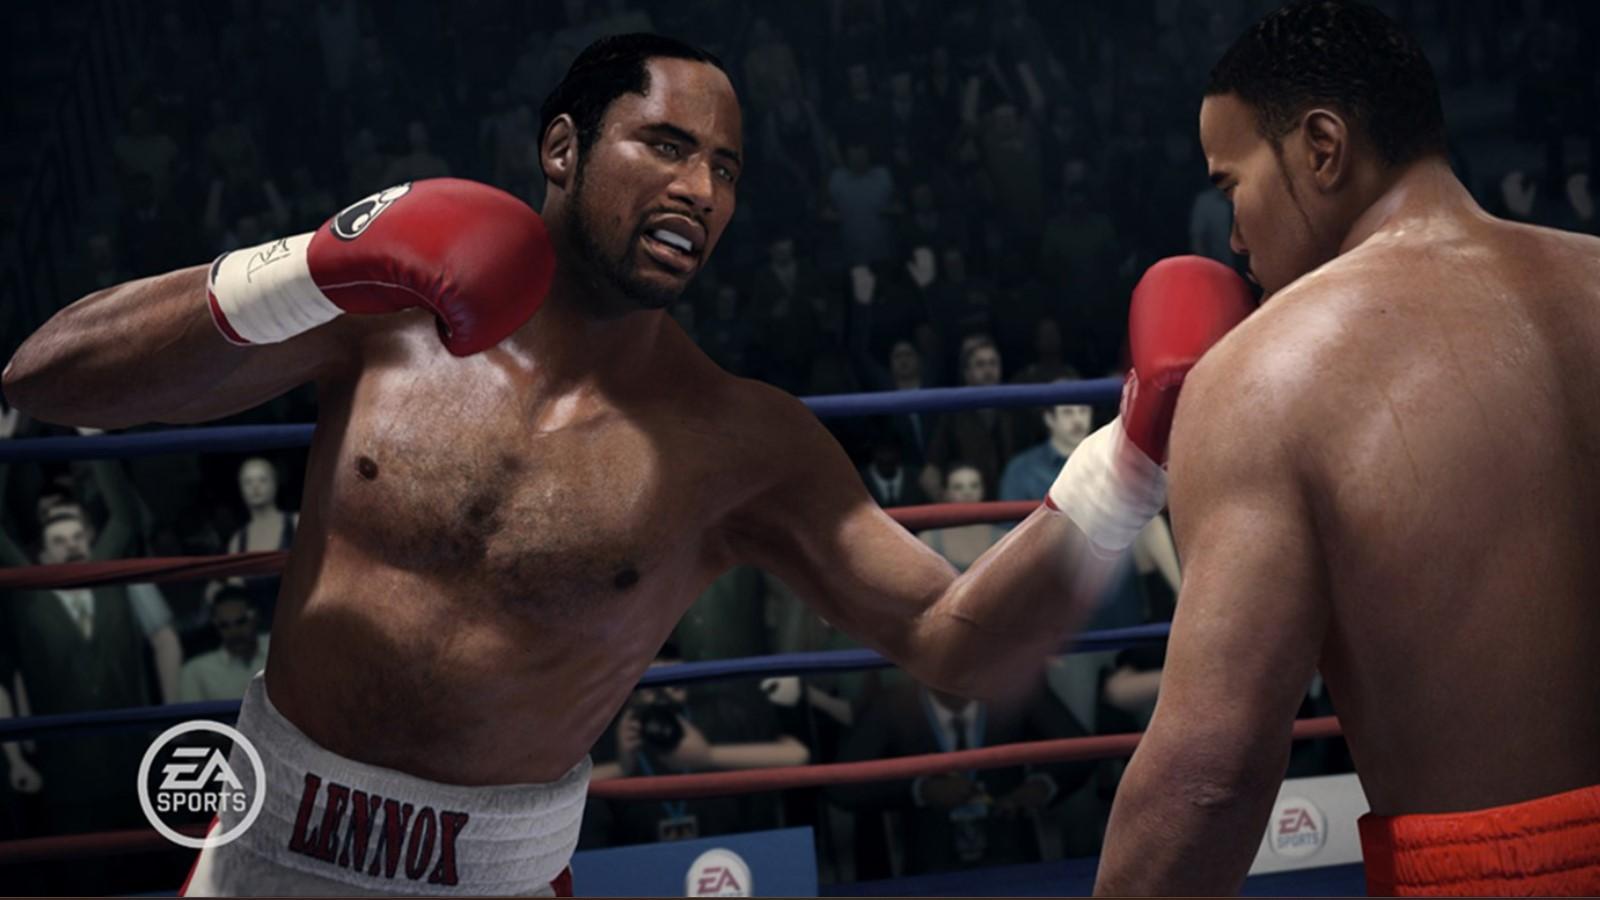 Lennox Lewis uppercuts an opponent in Fight Night Champion